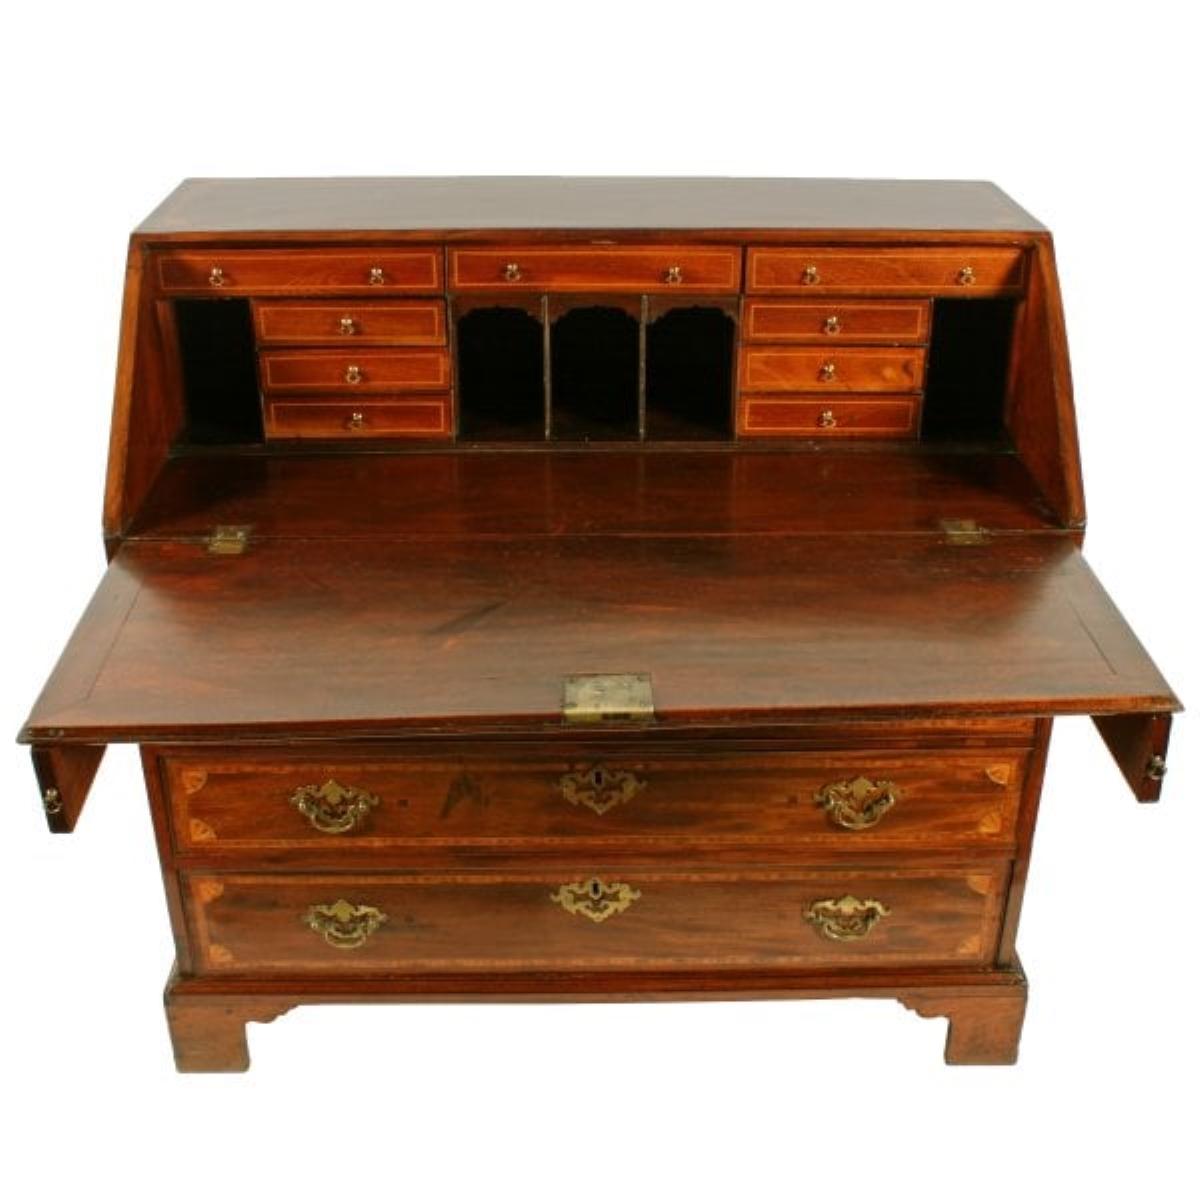 Georgian Inlaid Mahogany Bureau, 18th Century In Excellent Condition For Sale In Southall, GB